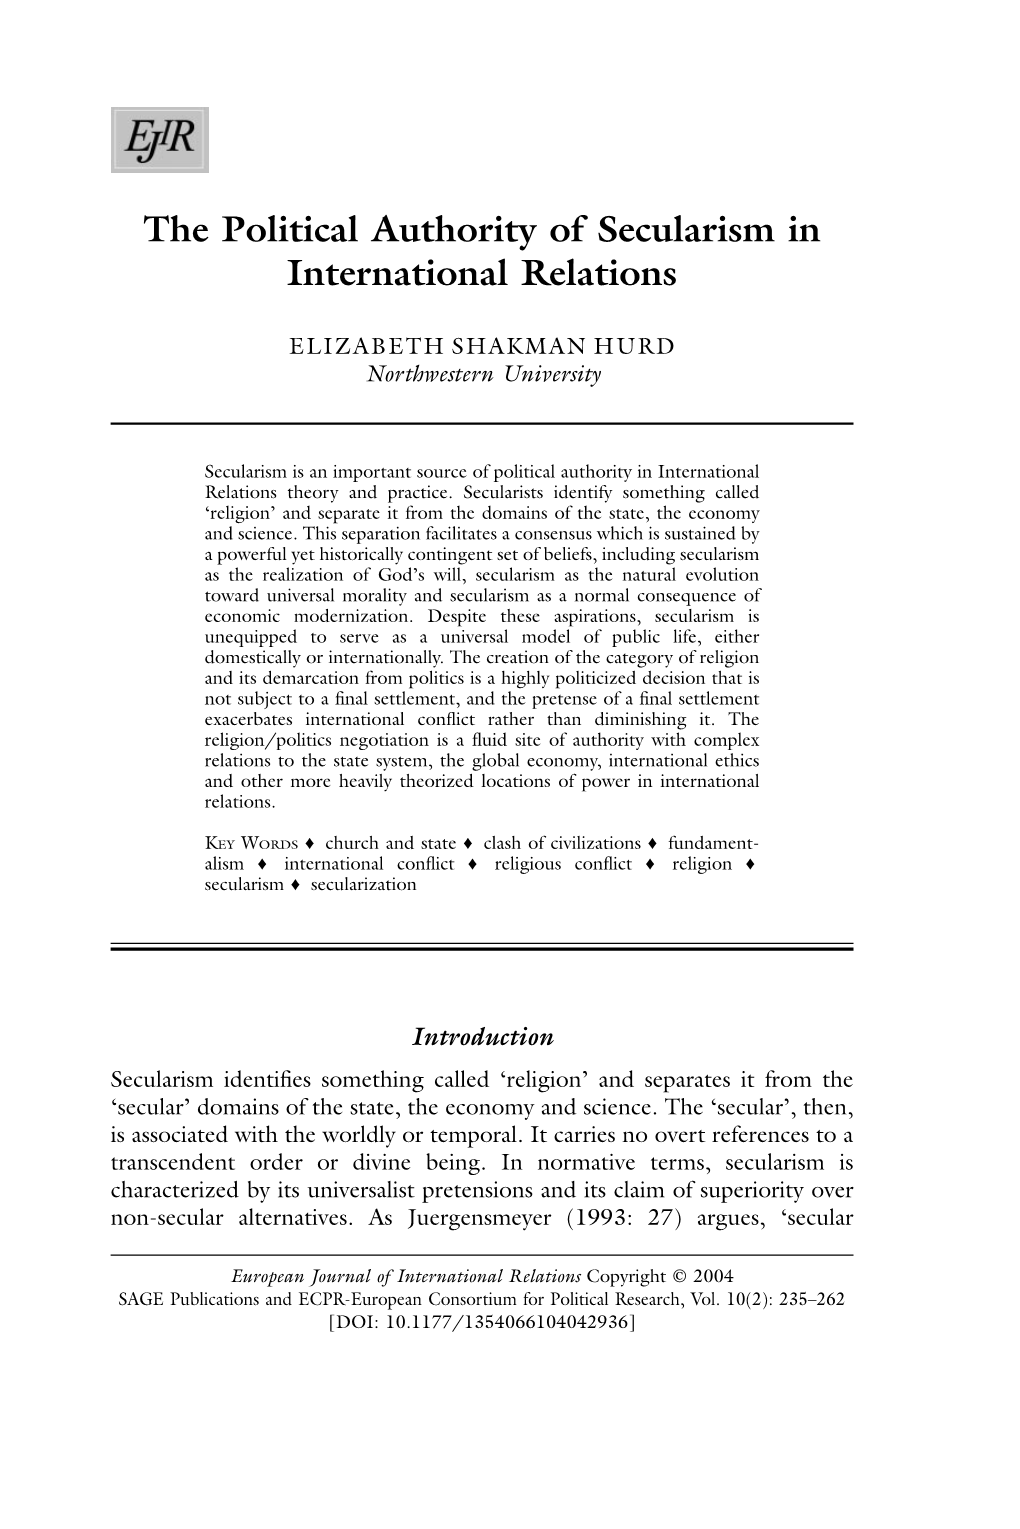 The Political Authority of Secularism in International Relations